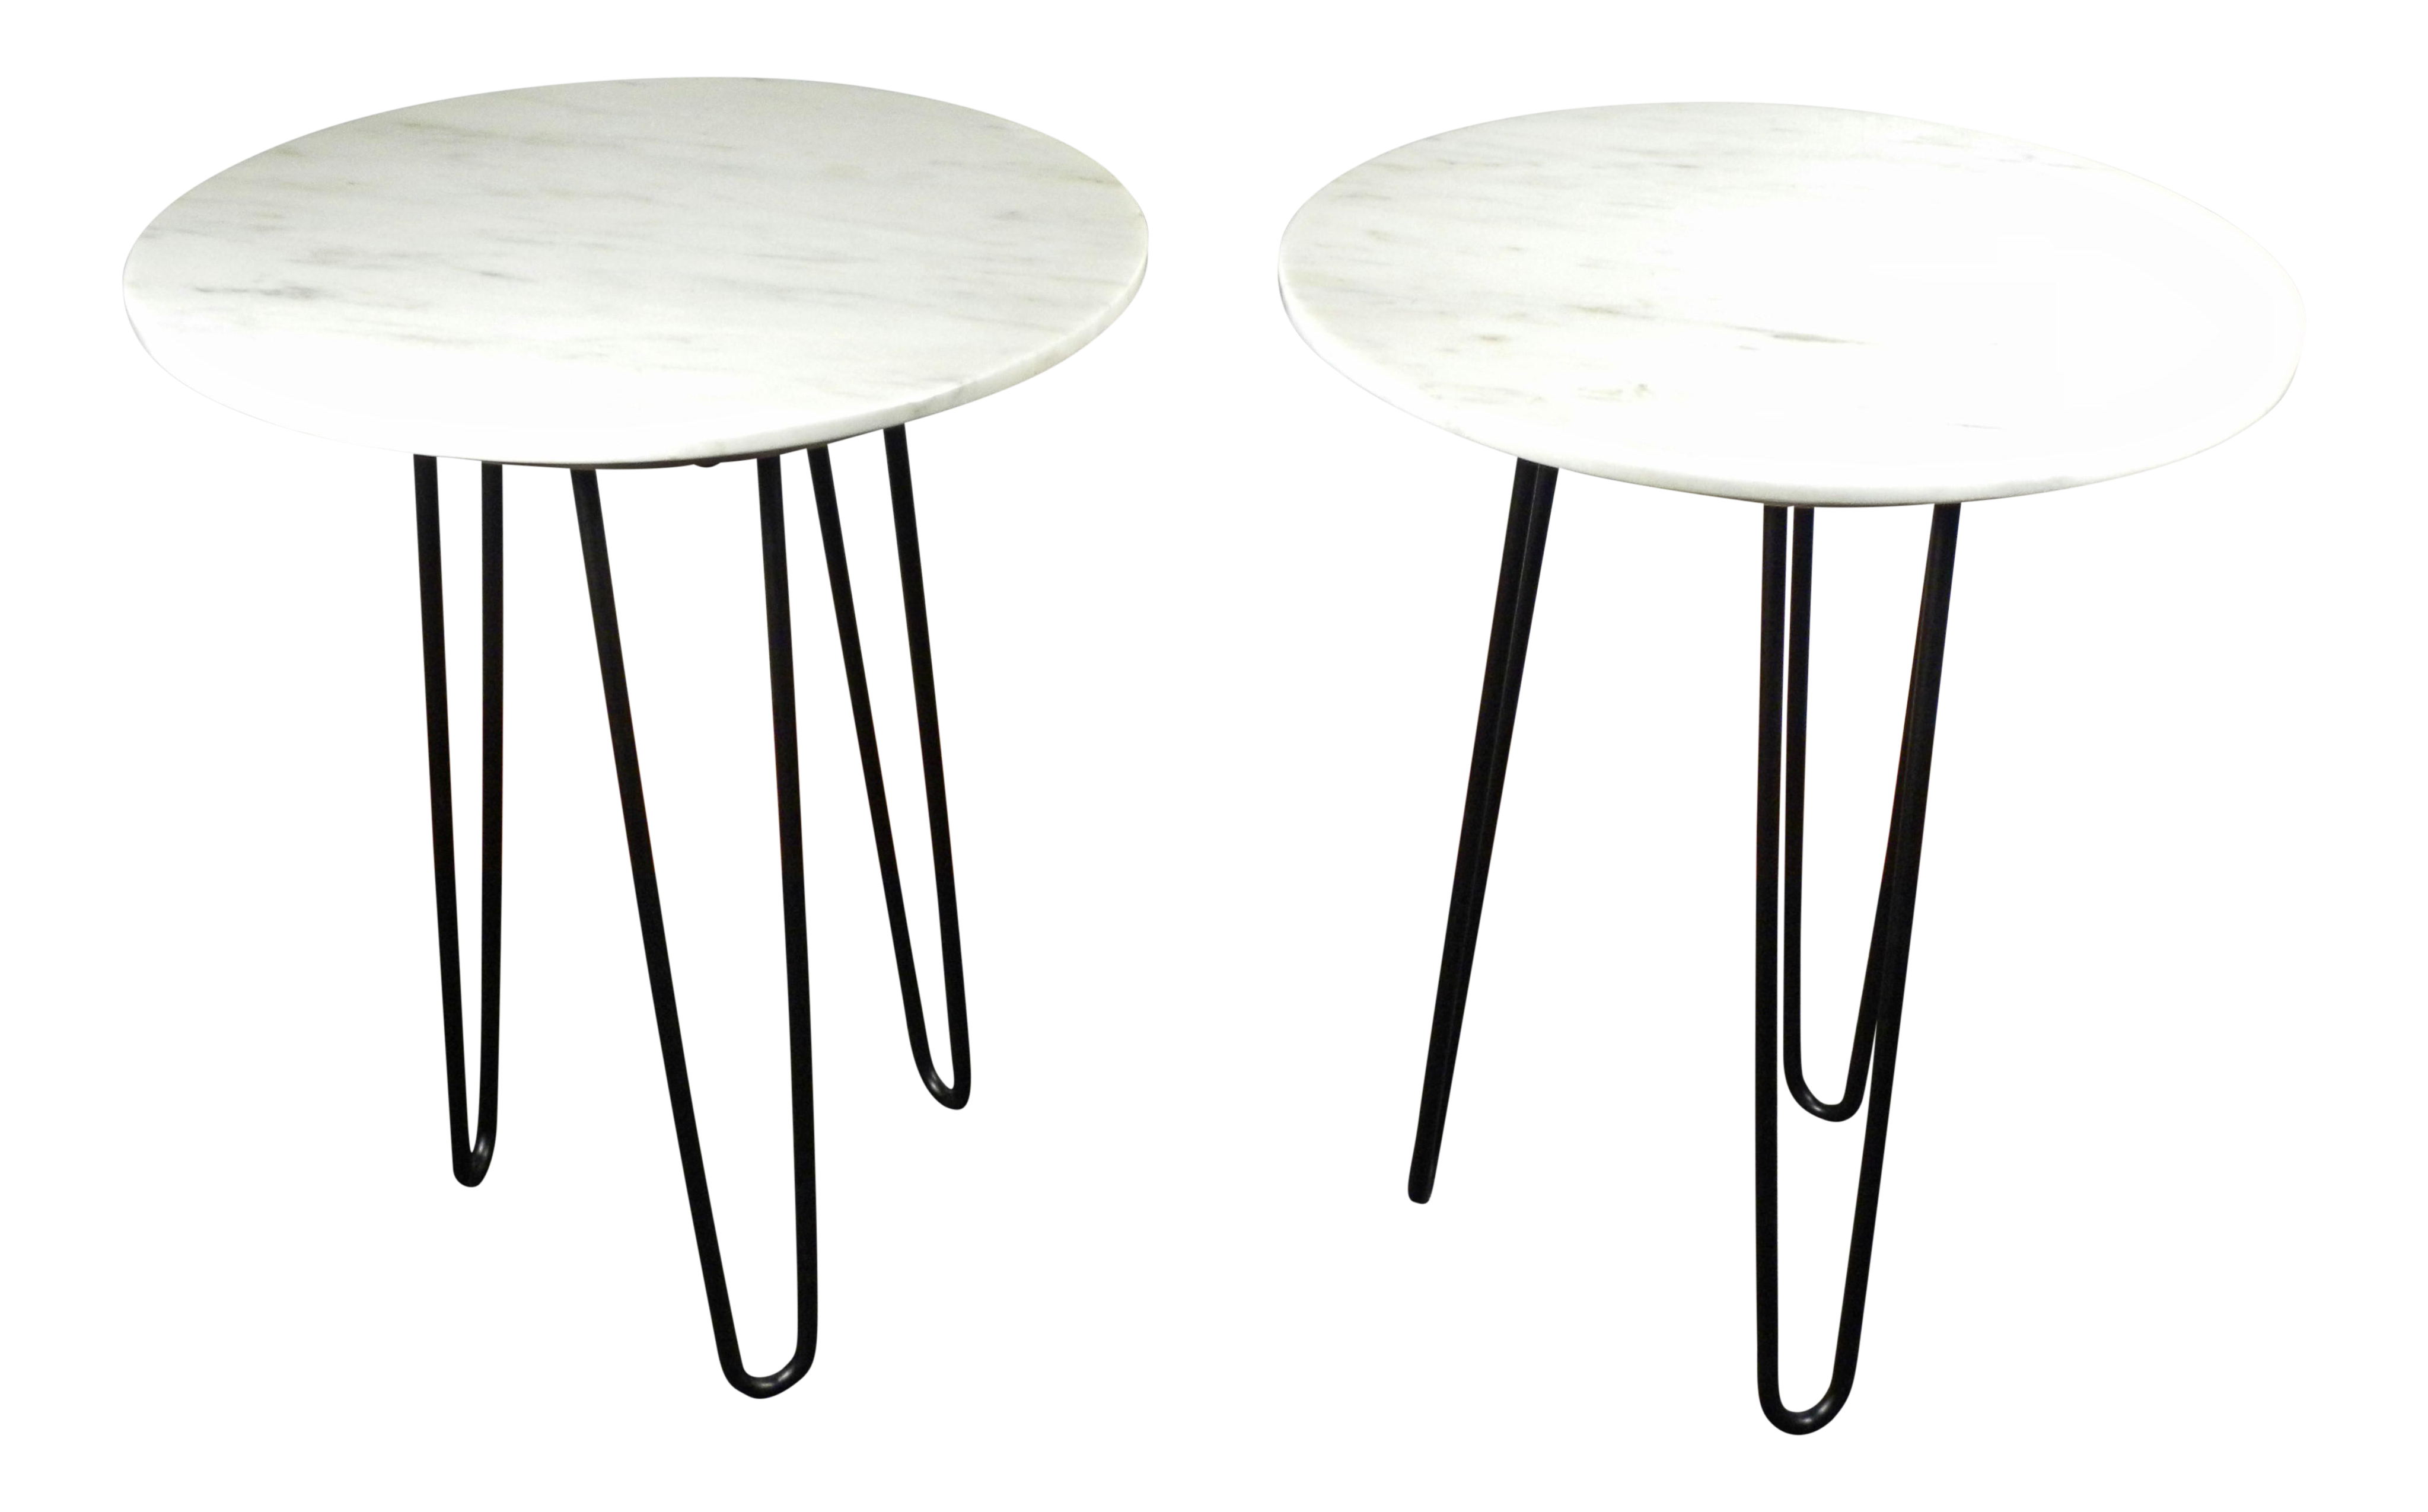 vintage mid century marble end tables accent night stands pair white table chairish wood with hairpin legs retro designer furniture battery operated indoor lamps room dividers